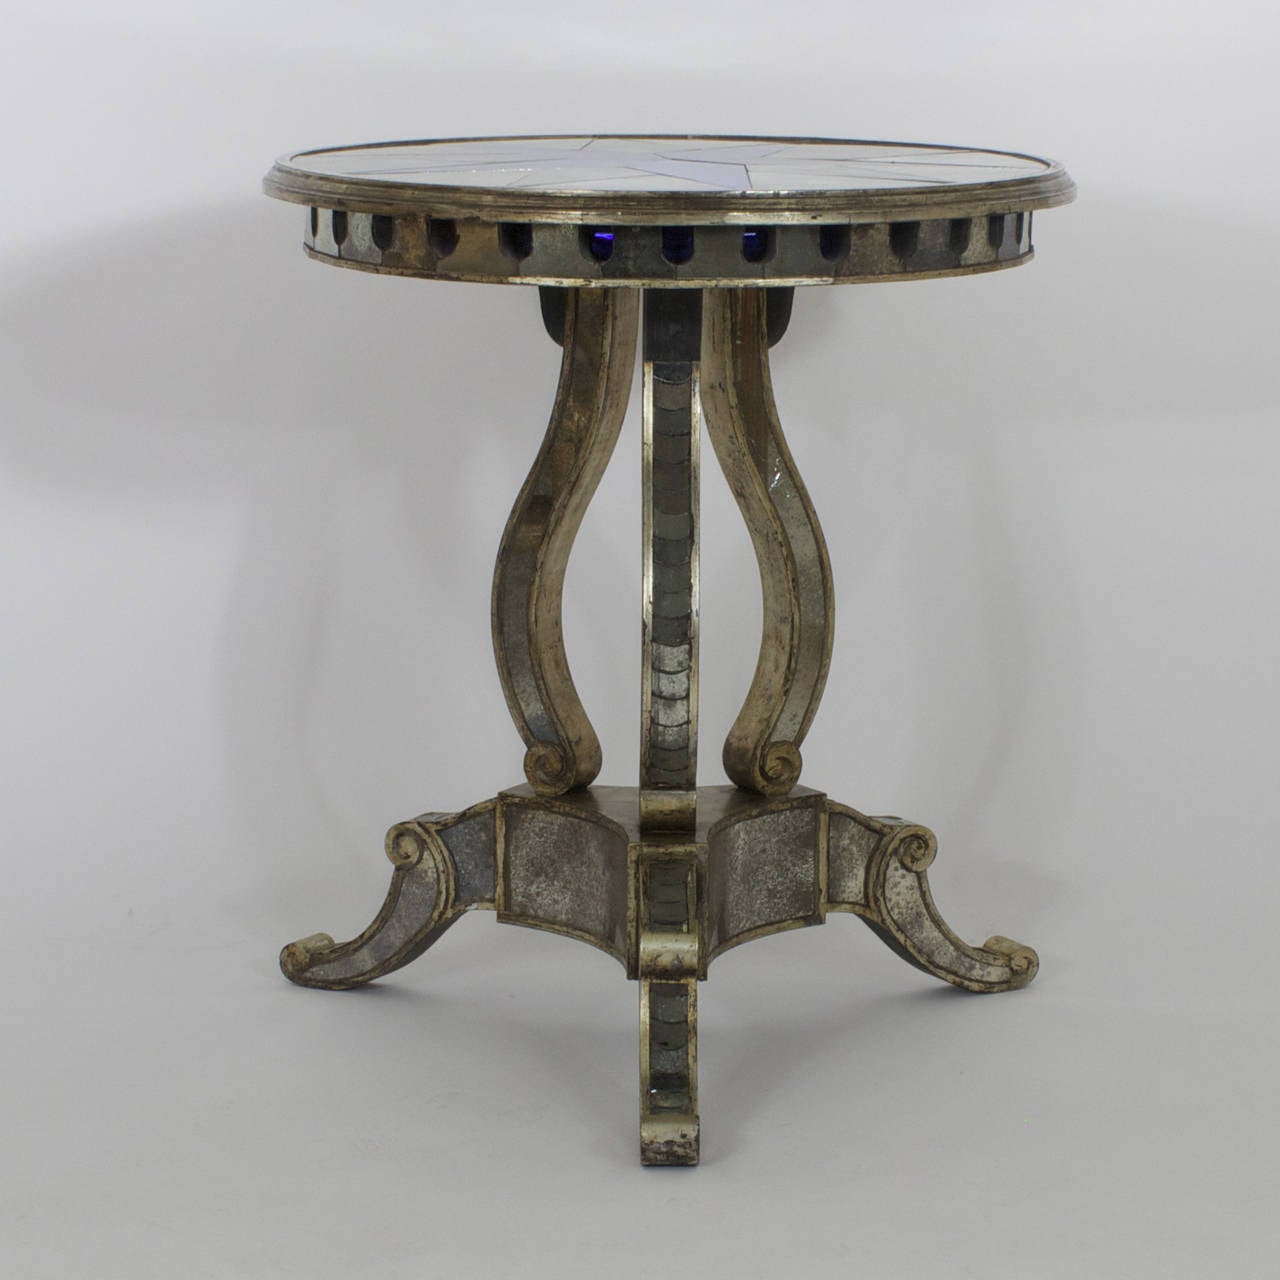 Stunning pair of mirrored end tables that are an intriguing combination of influences. Manufactured in the Mid-Century and drawing from the Italian Renaissance, Regency and Art Deco. The mirrored tops have a blue and silver kaleidoscope pattern